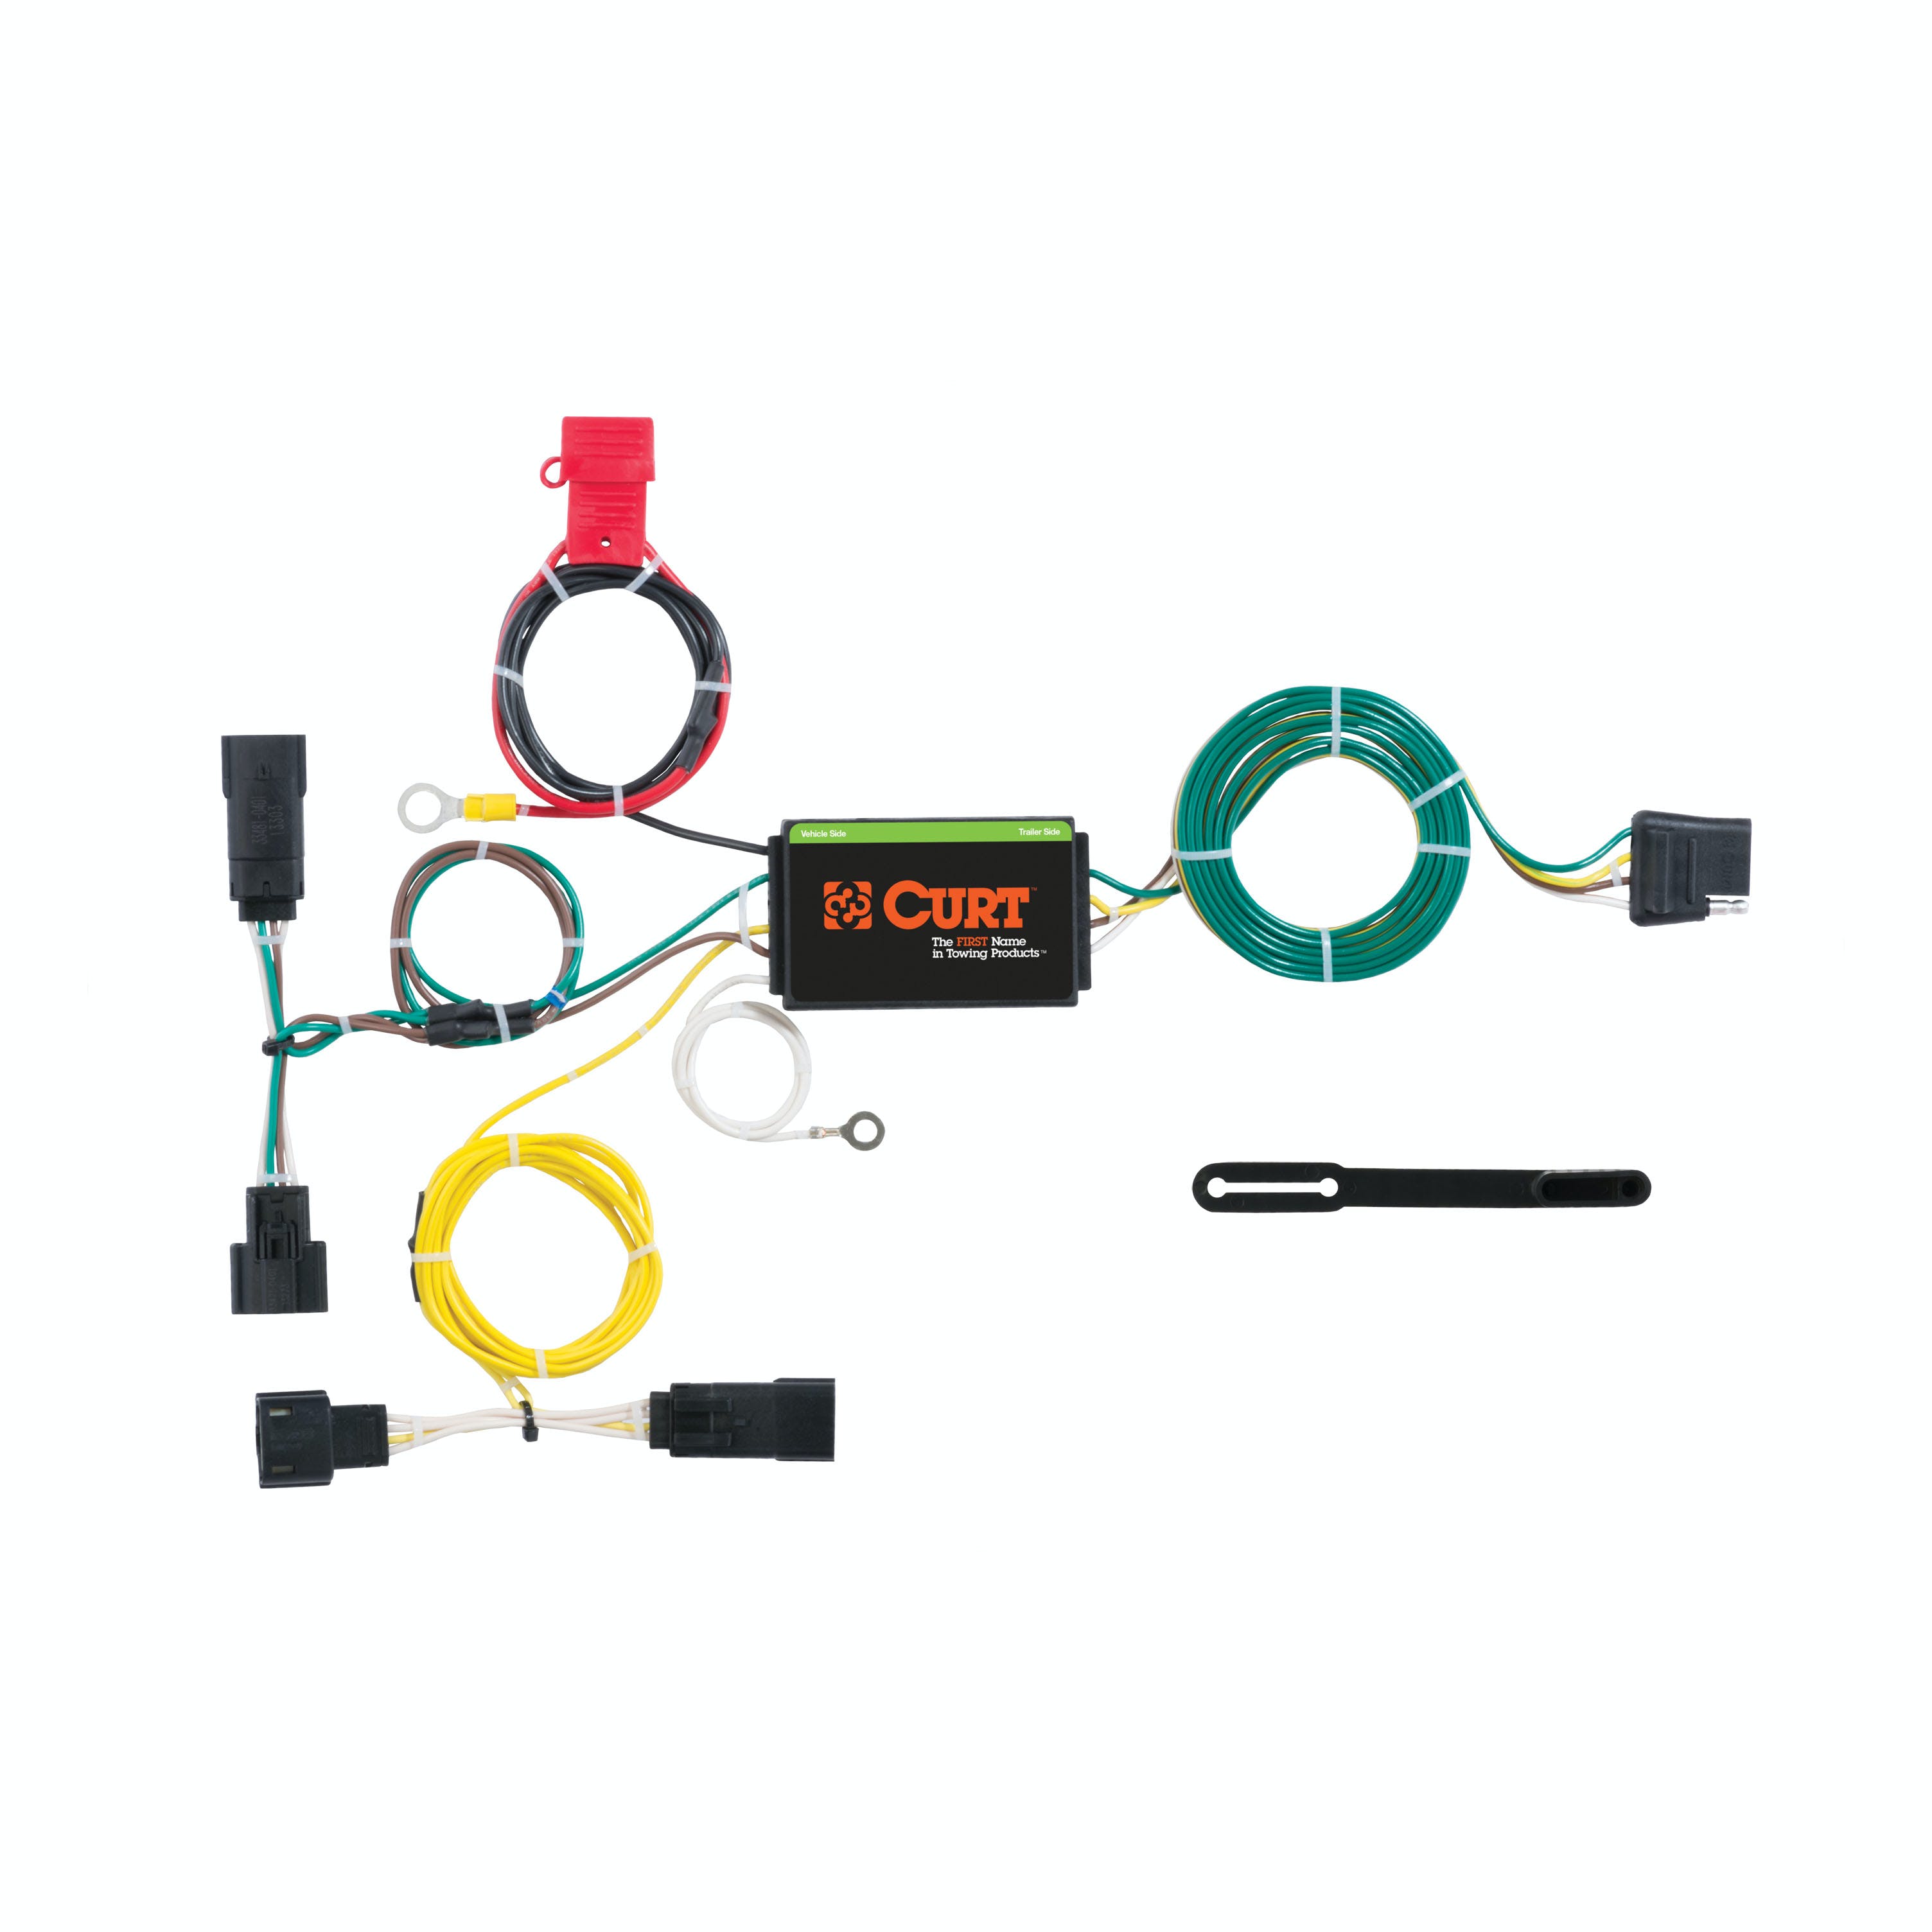 CURT 56234 Custom Wiring Harness, 4-Way Flat Output, Select Dodge Charger